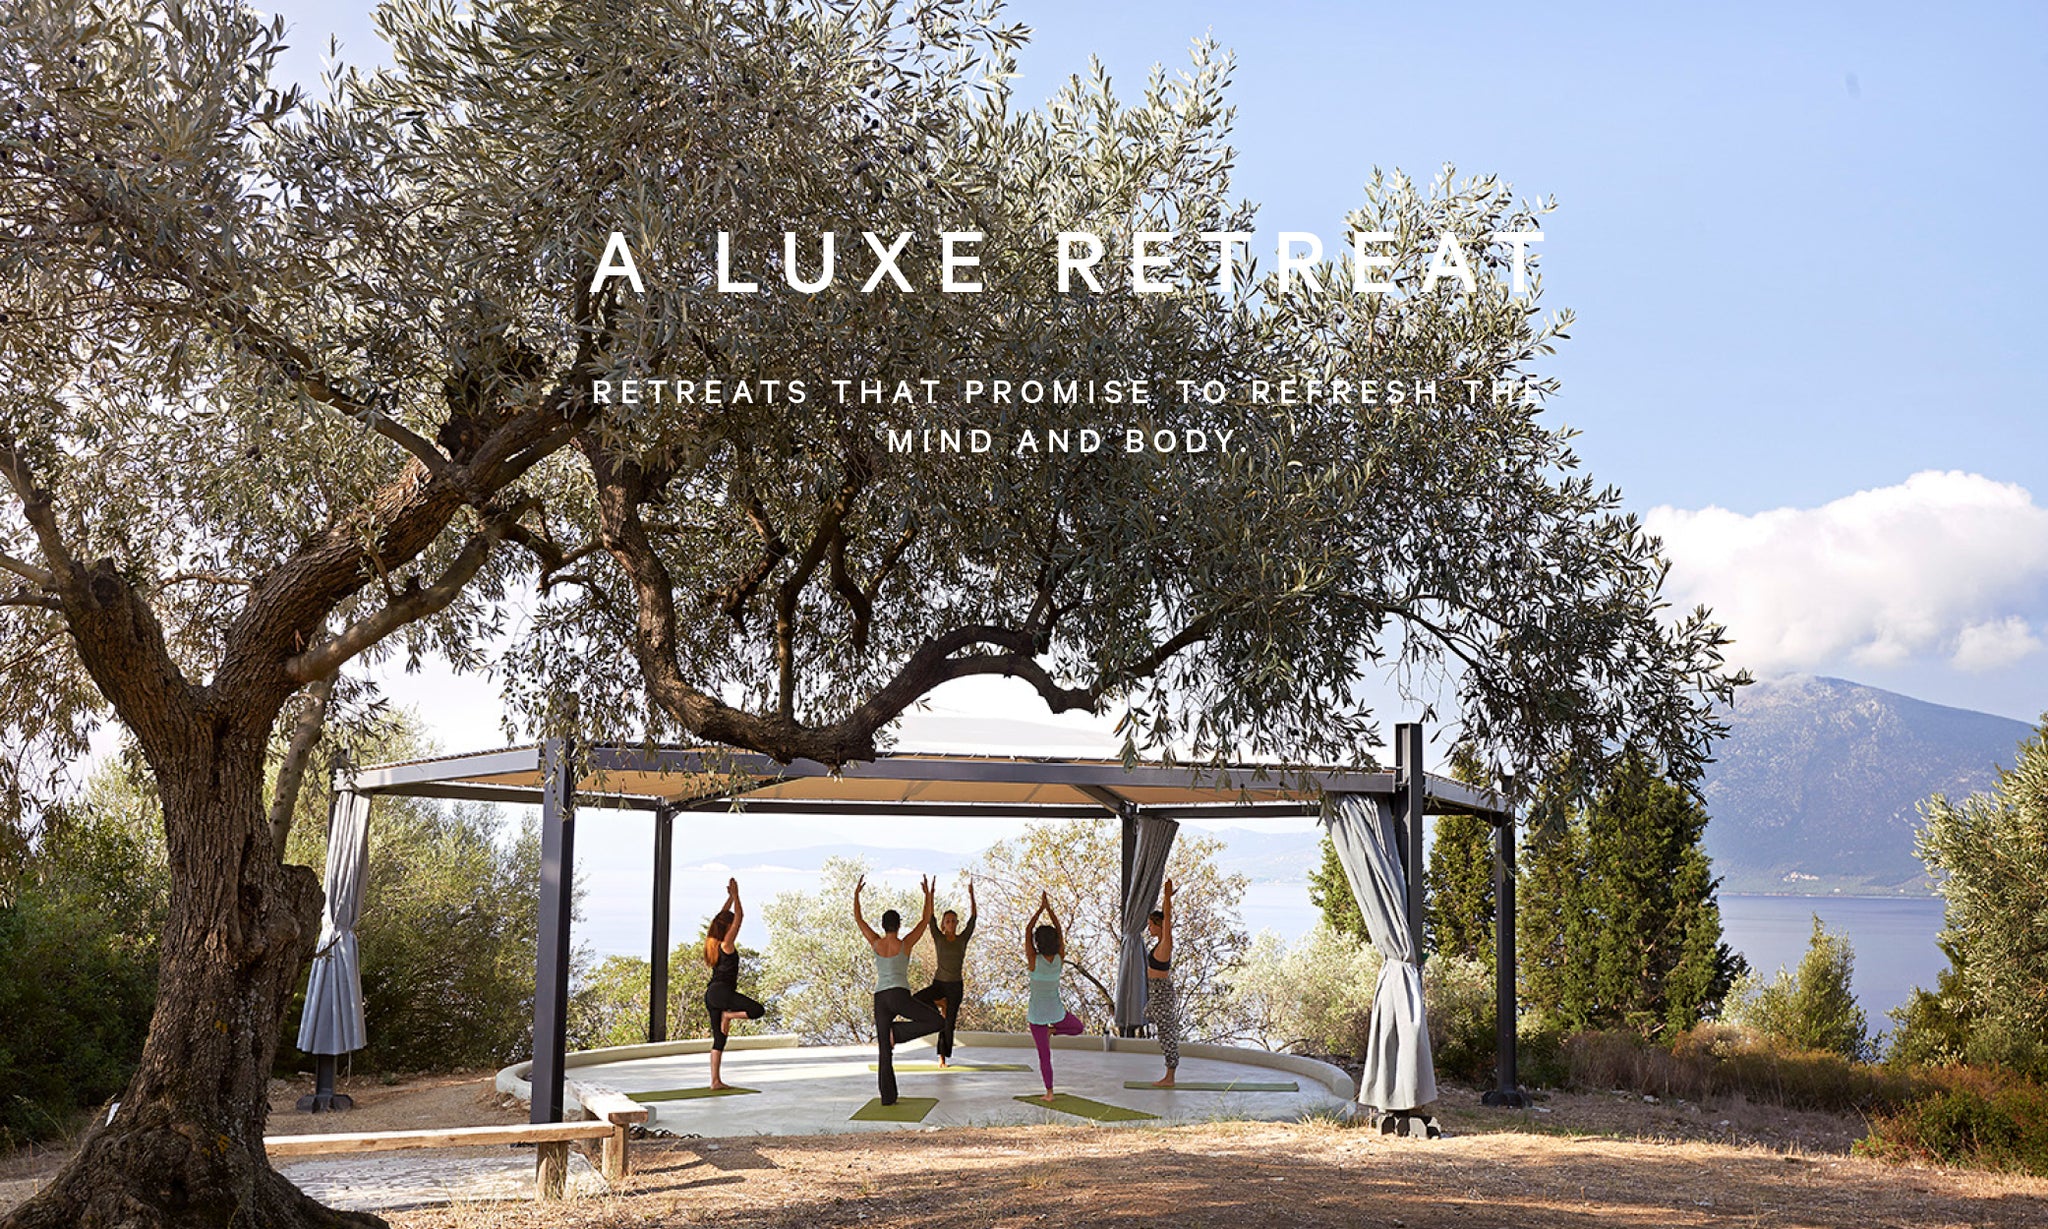 A LUXE RETREAT